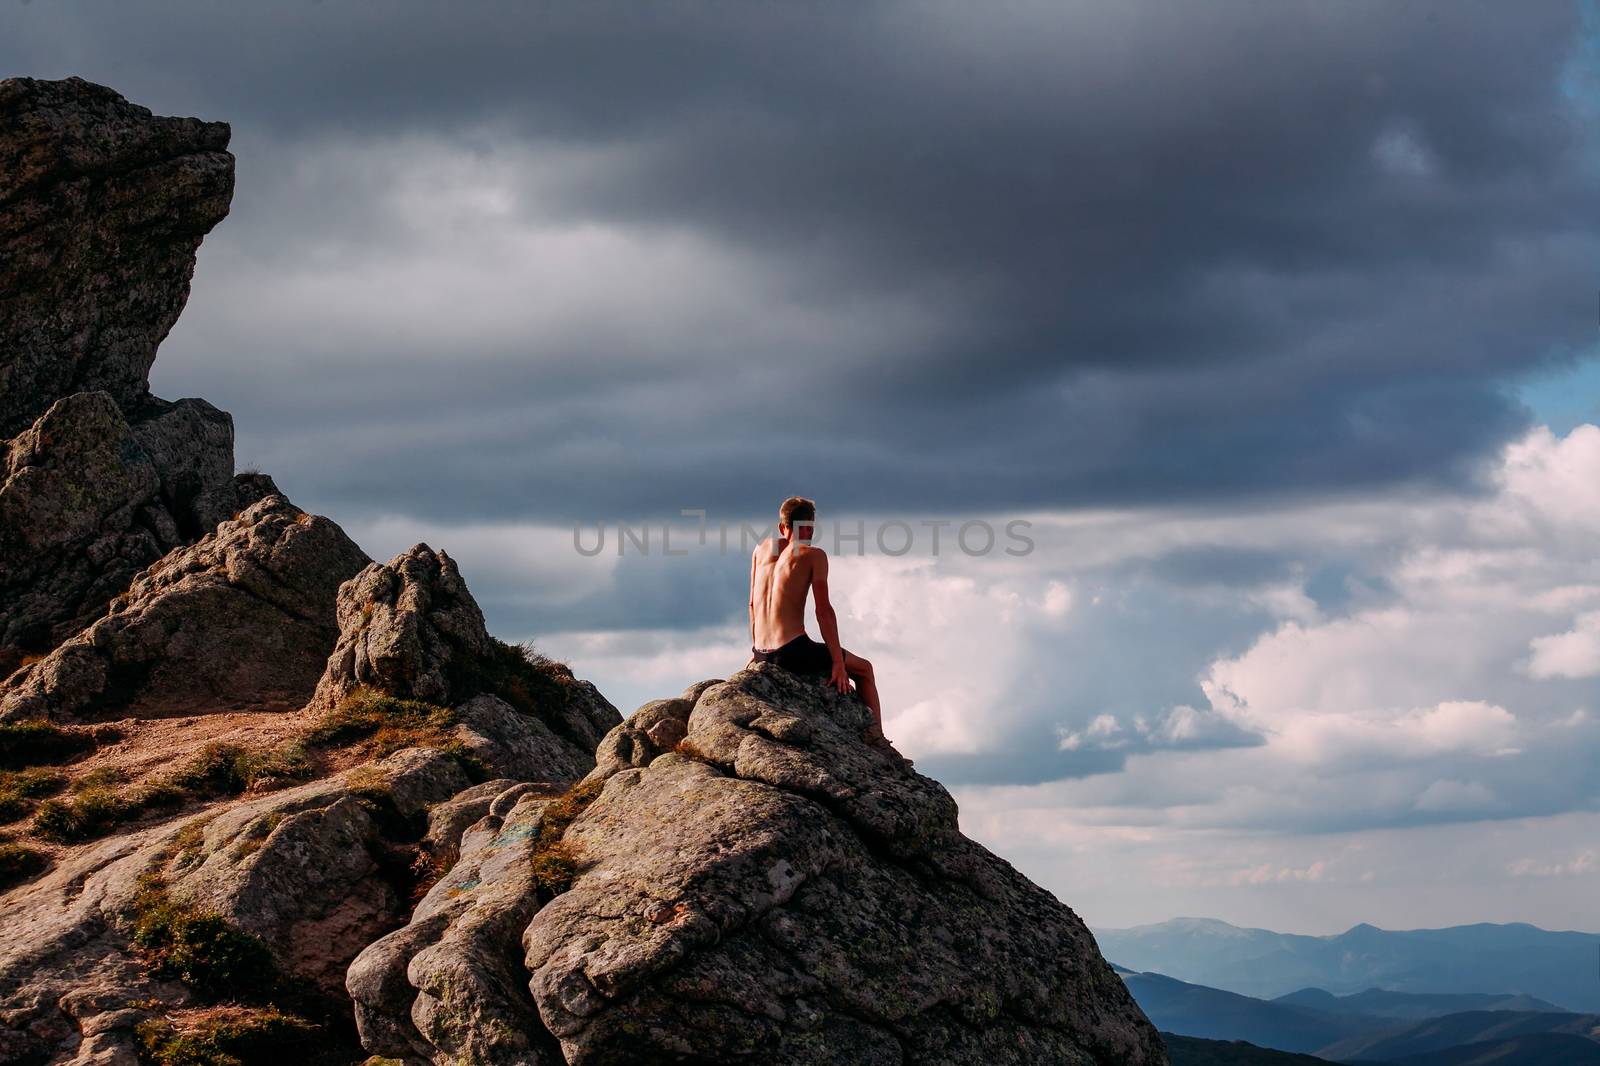 A guy sits on a stone in the mountains and looks into the distan by Opikanets